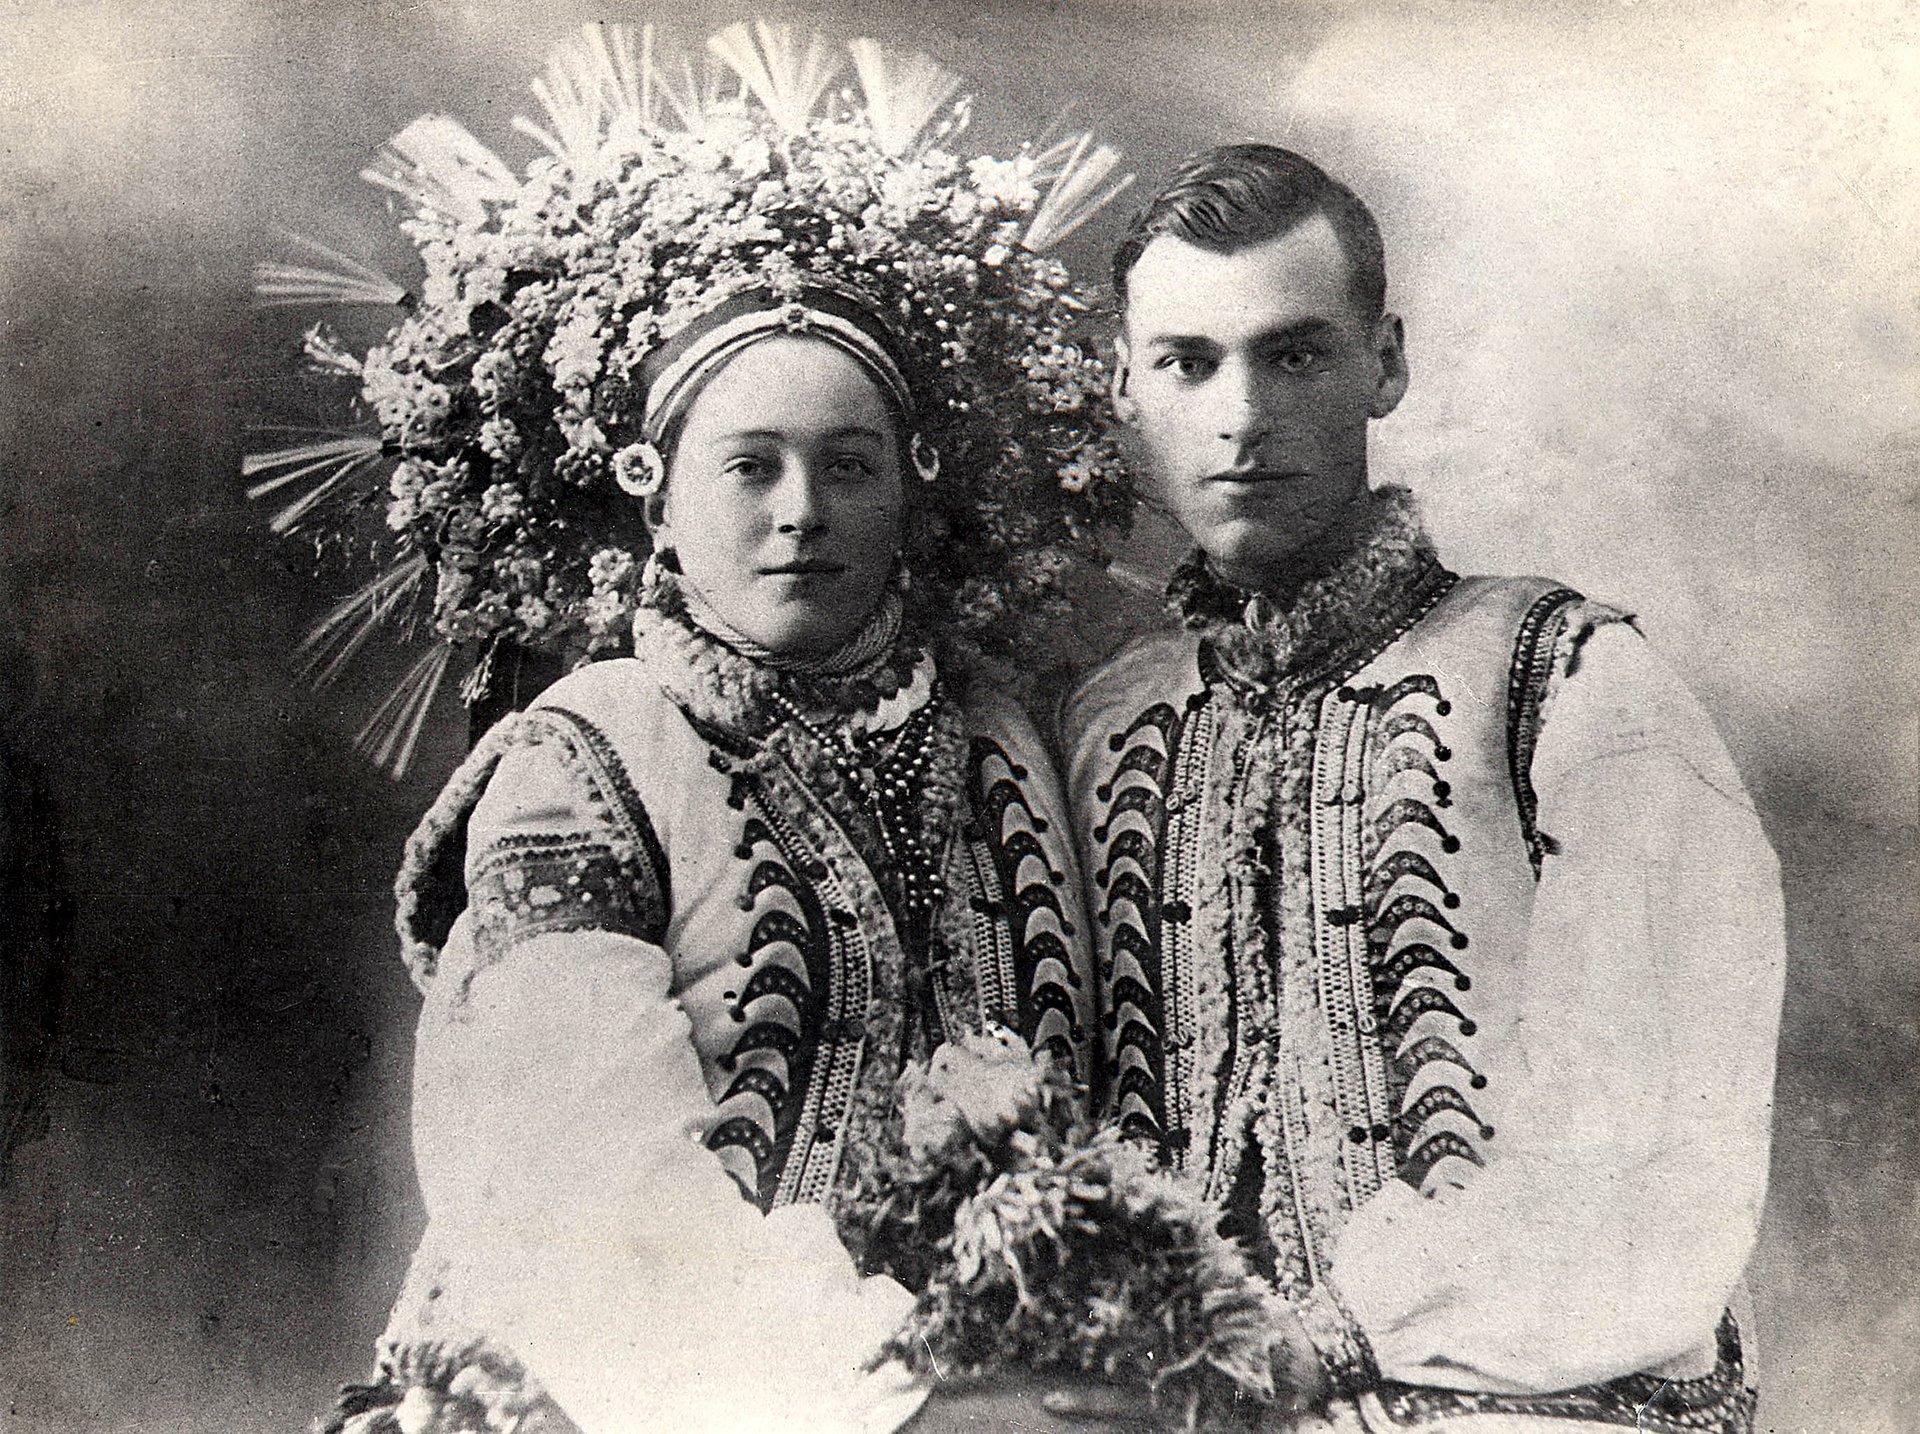 A look into the past: Ivan Gonchar Museum launches online exhibition with photos of Ukrainians